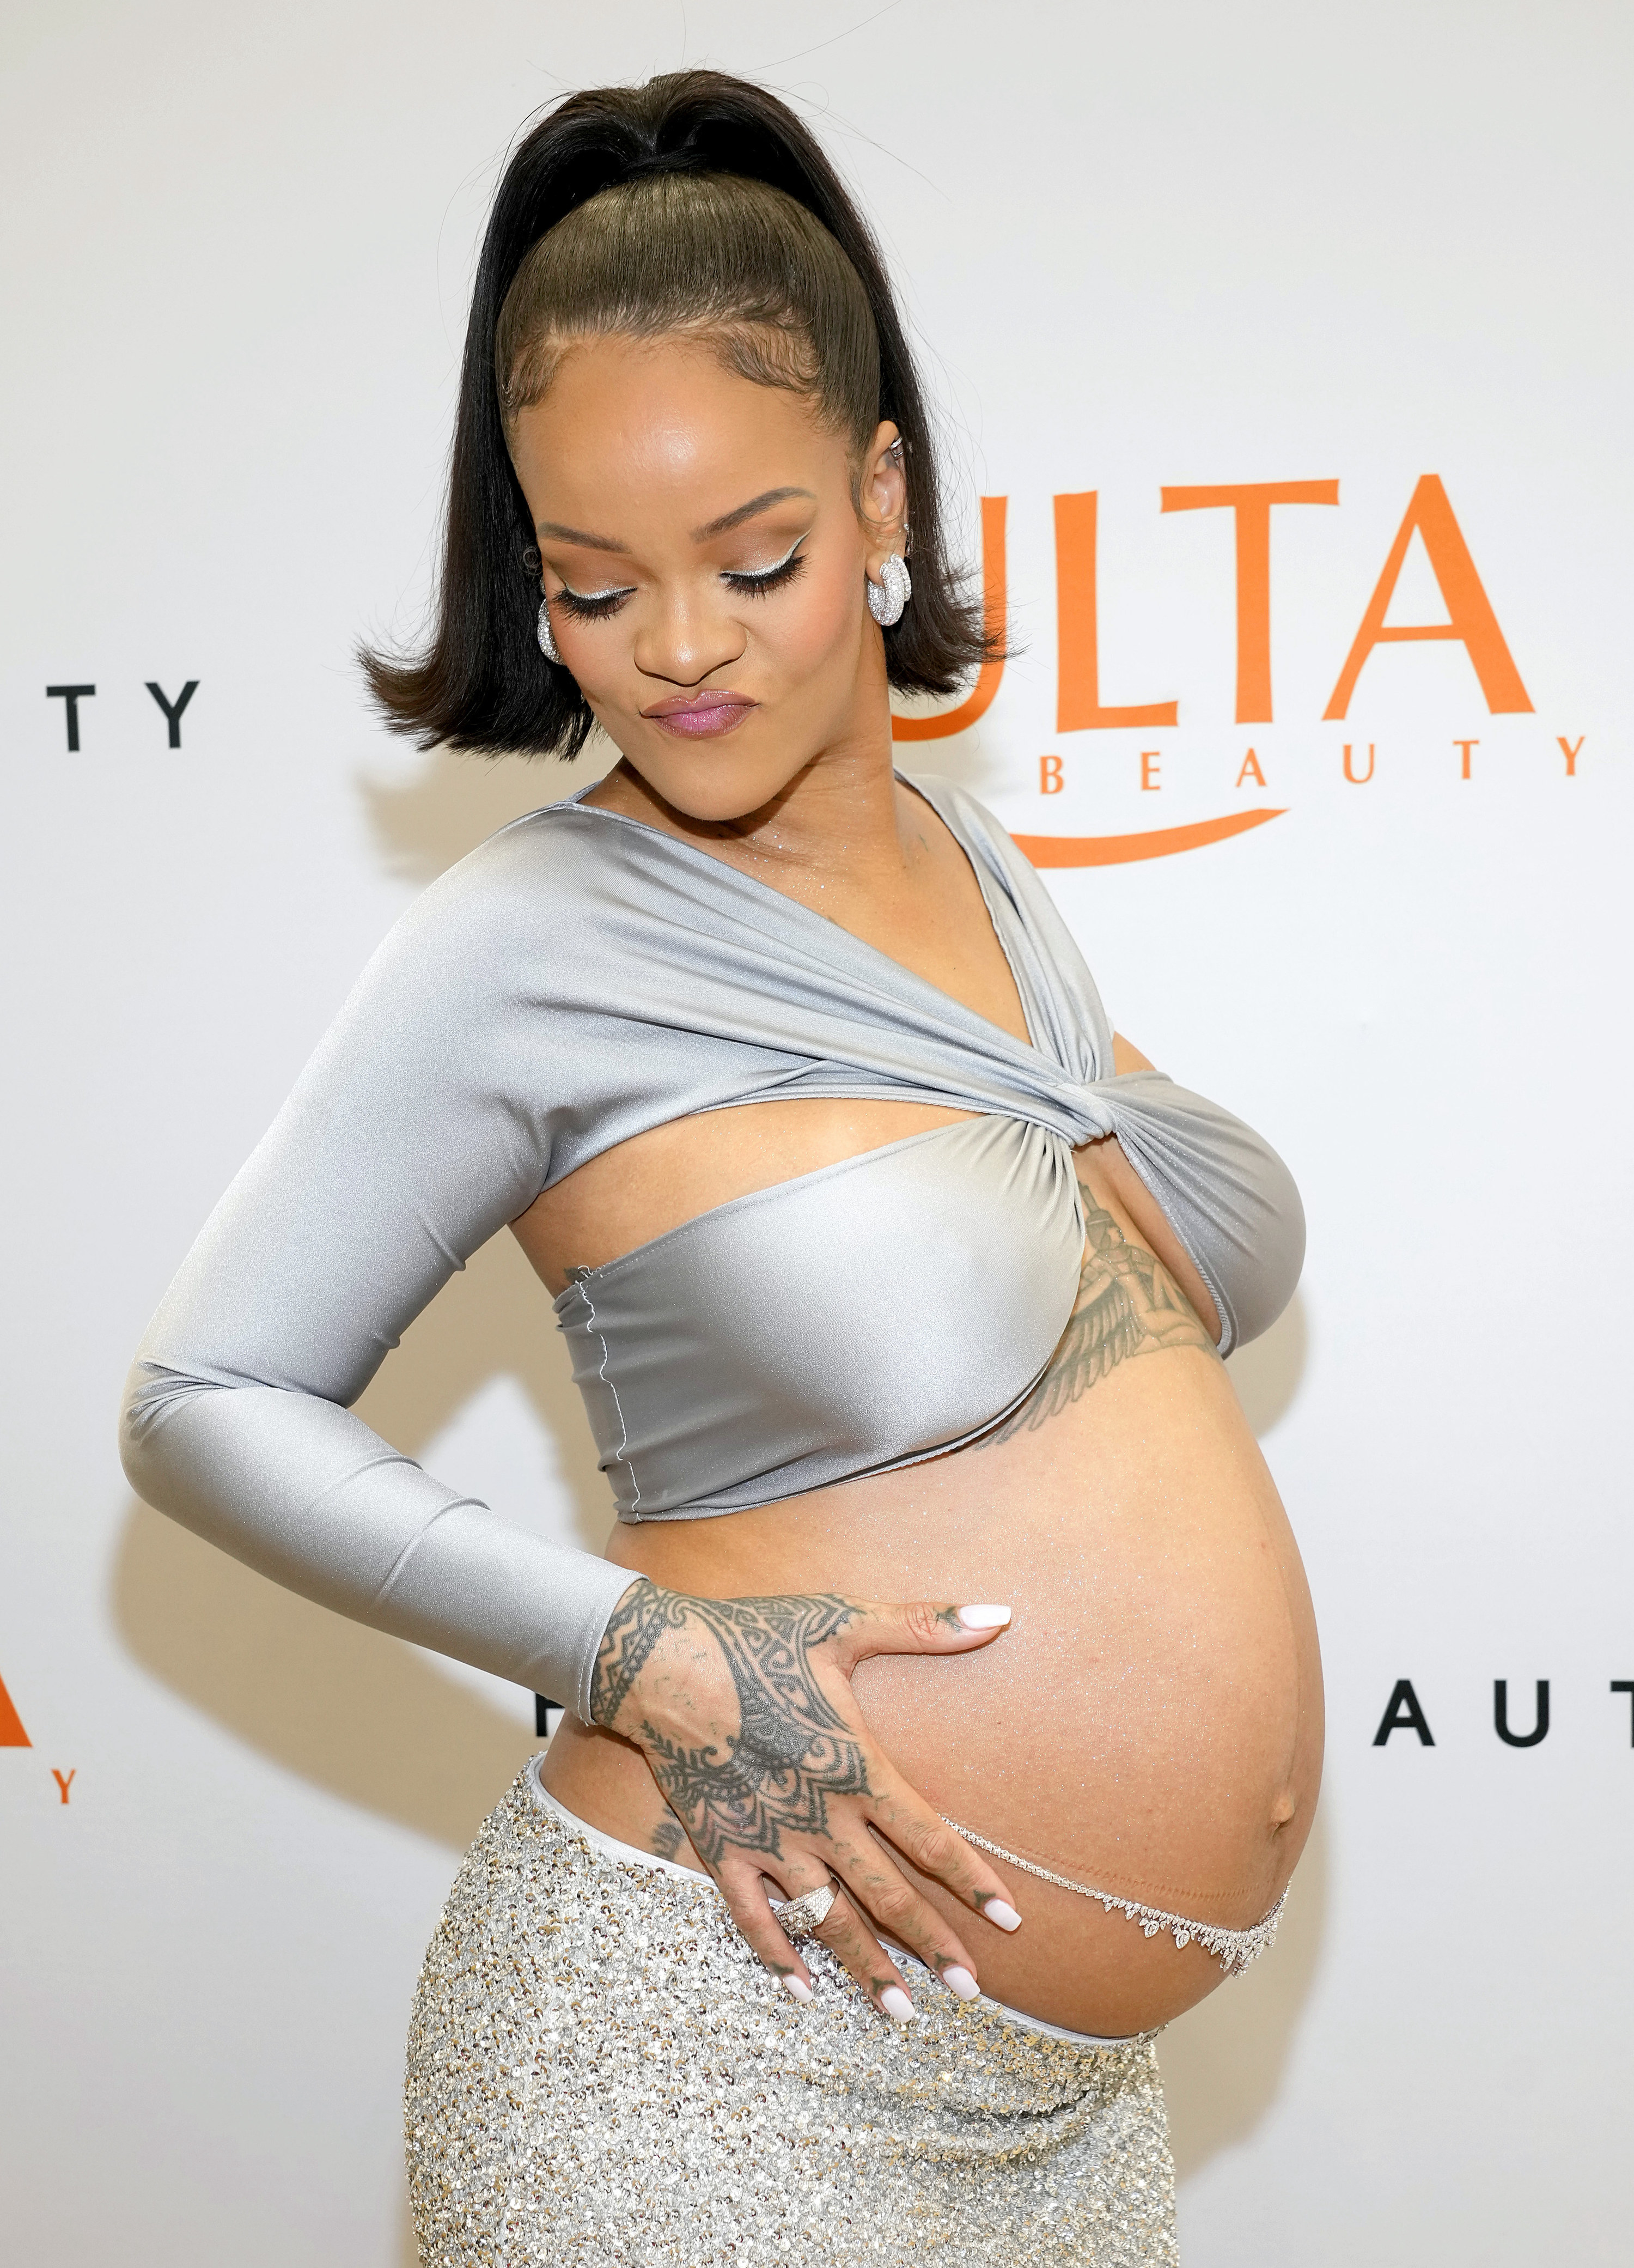 Rihanna & A$AP Rocky's Baby Is Here